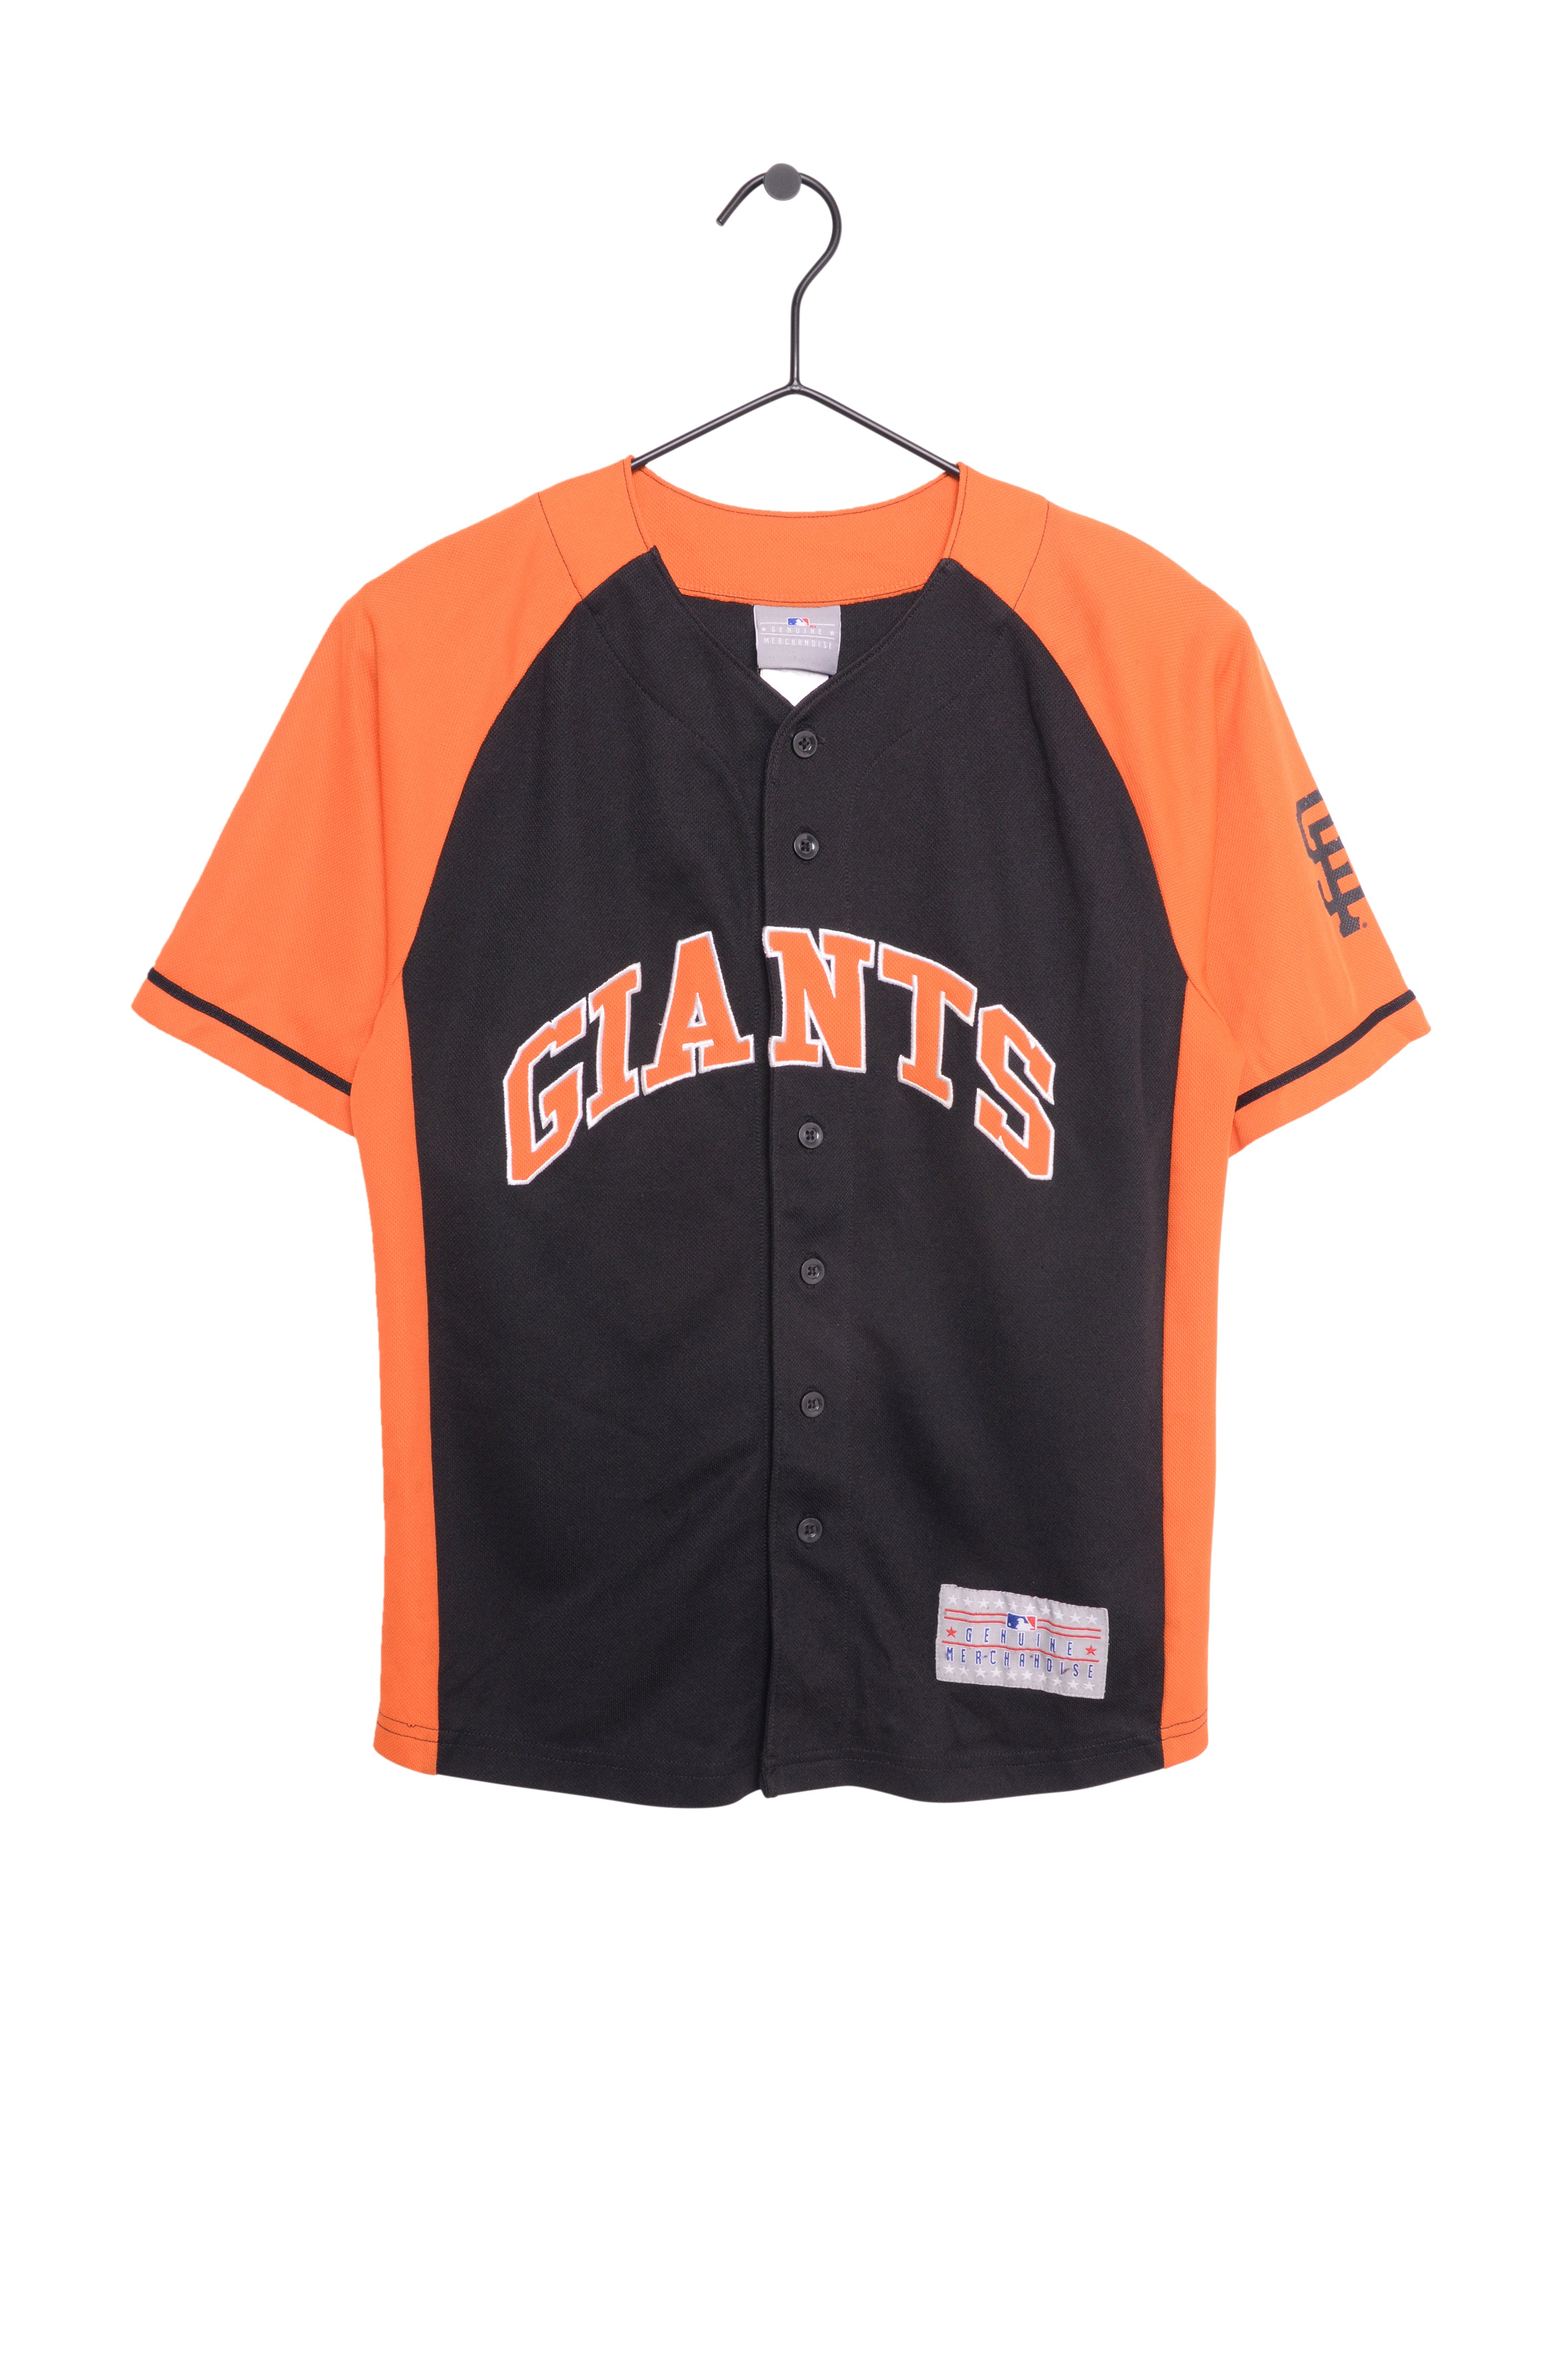 sf giants jersey today